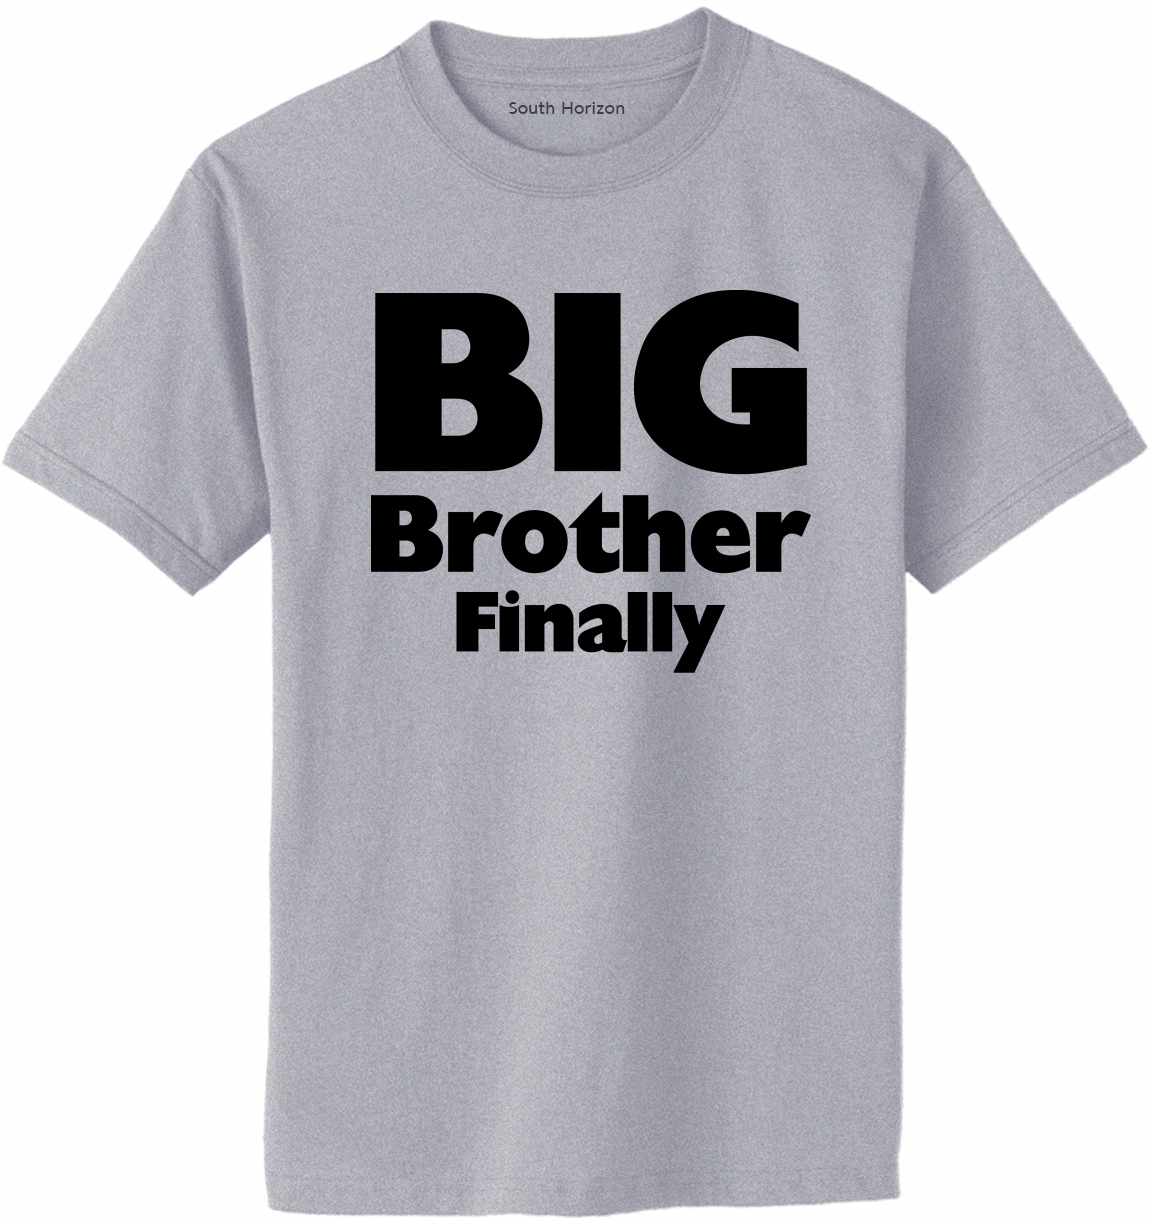 Big Brother Finally on Adult T-Shirt (#1334-1)